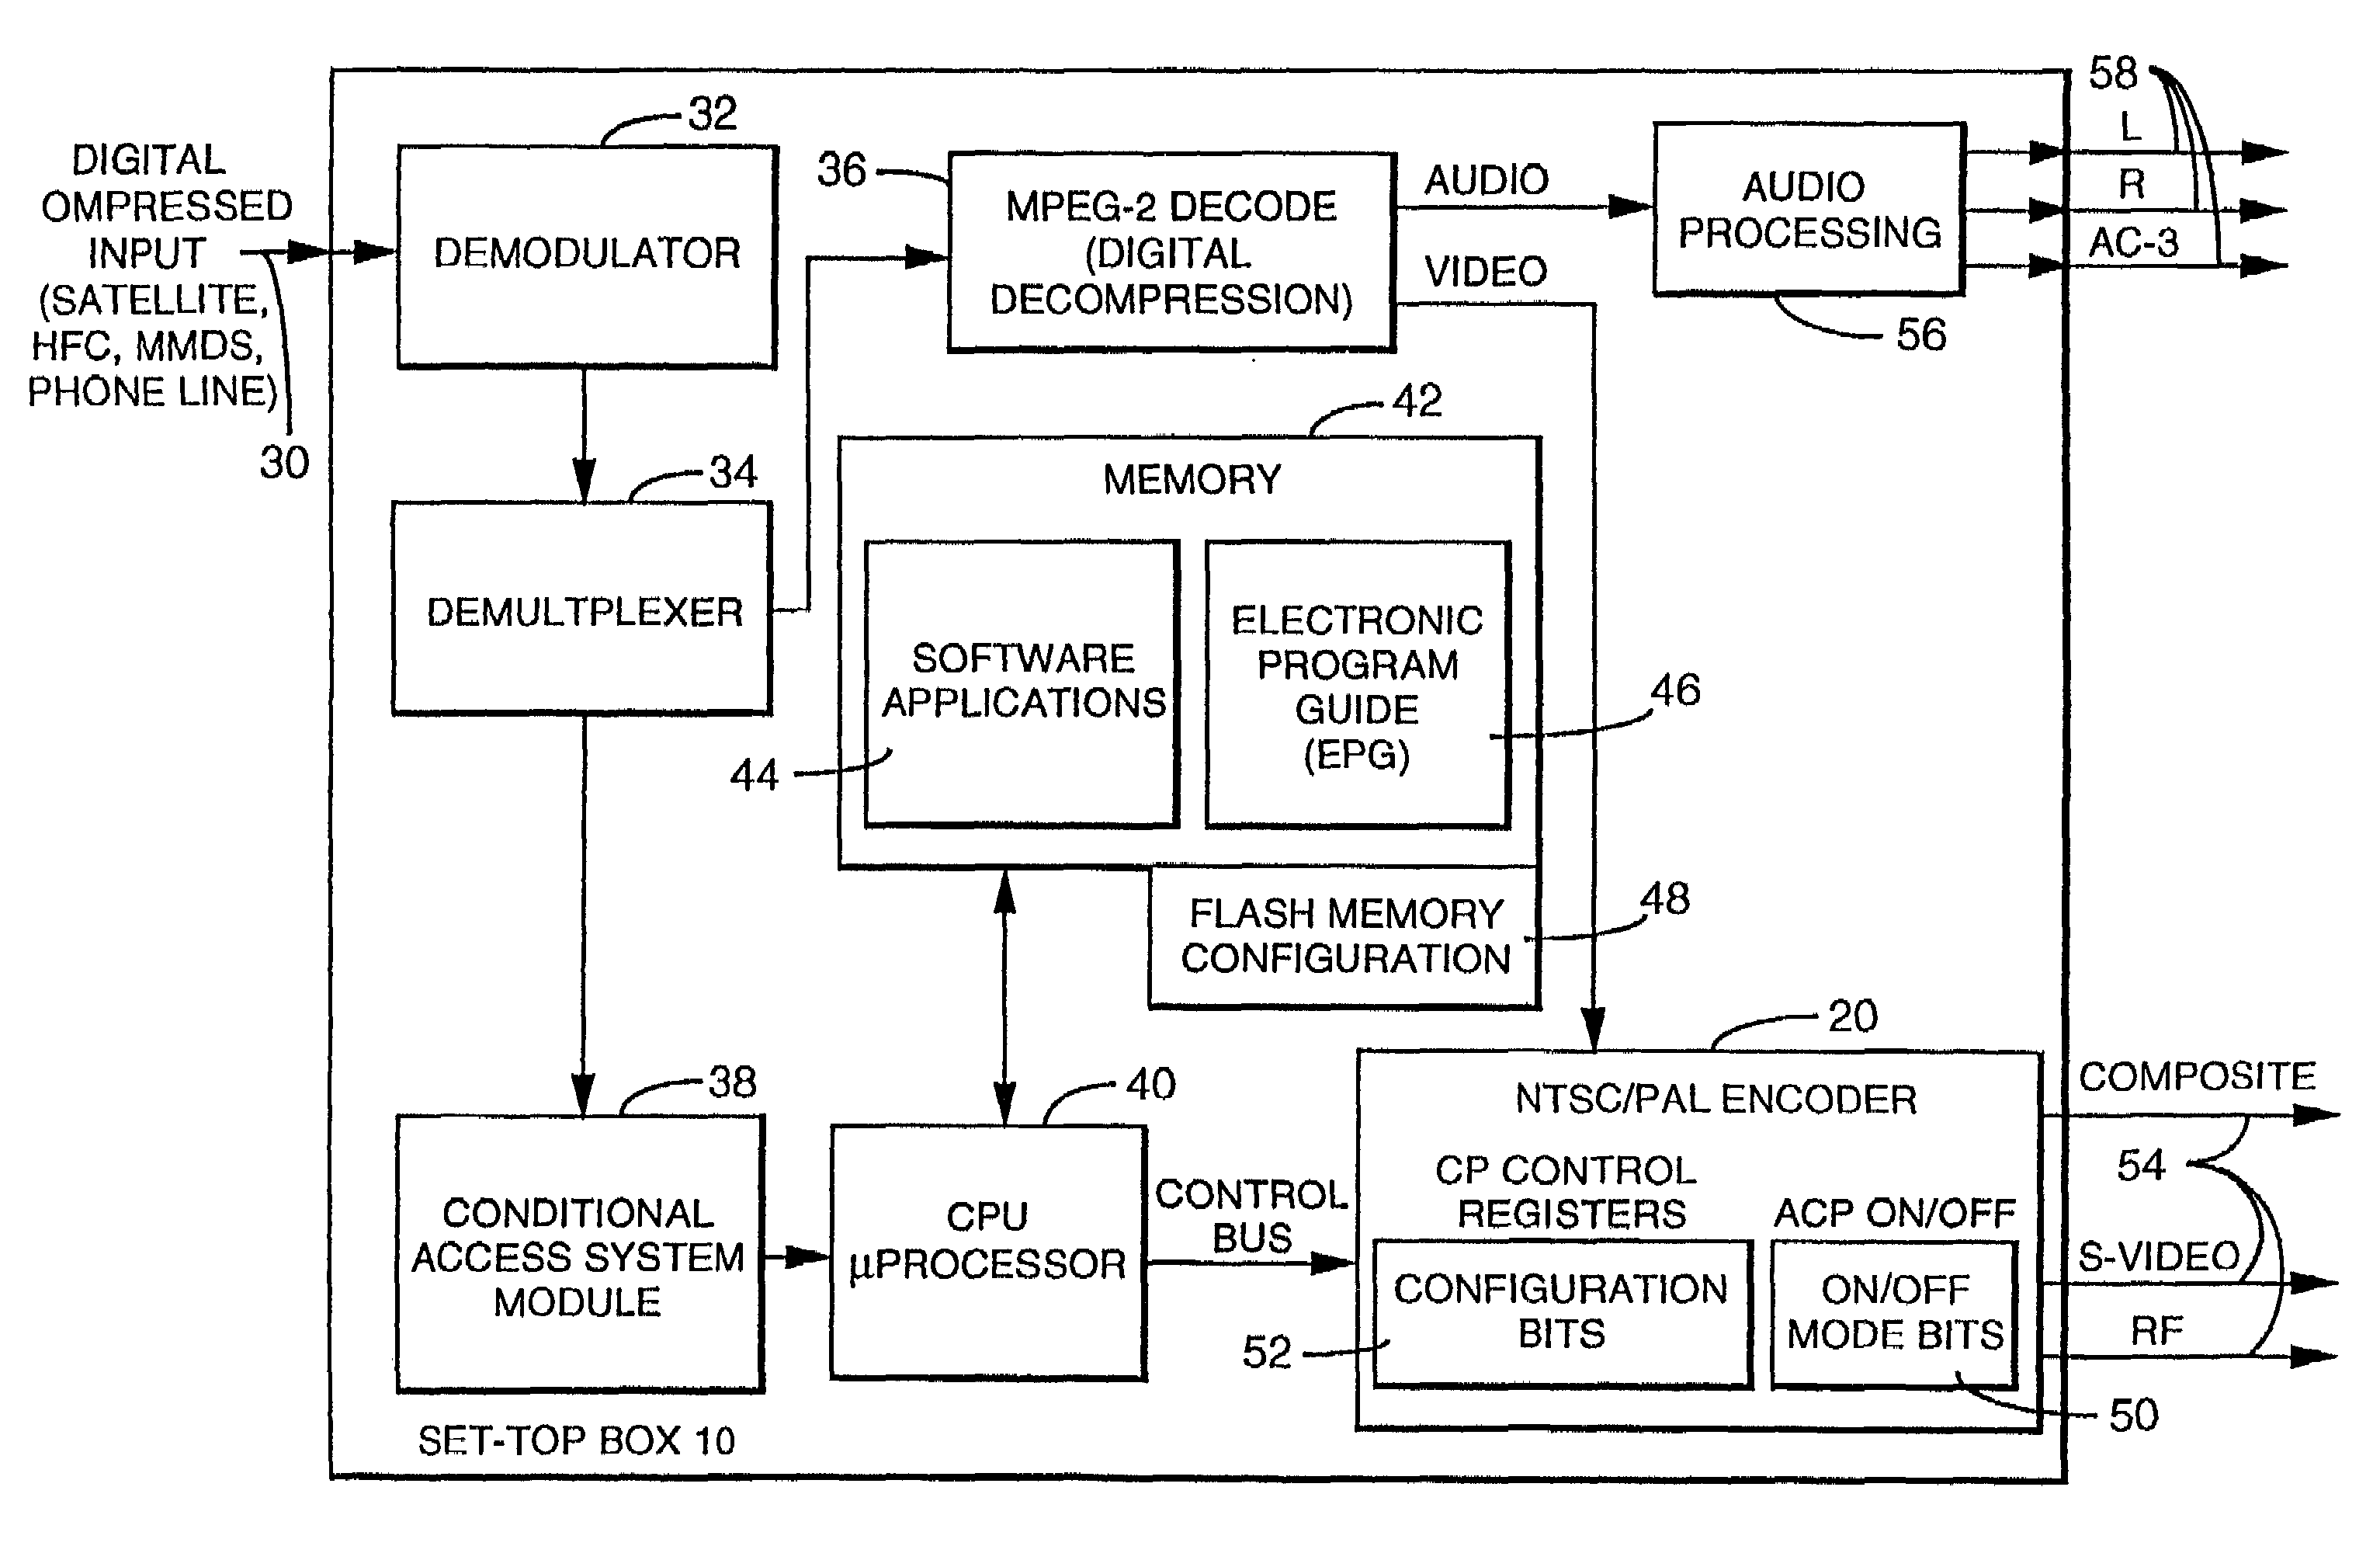 Method and apparatus for providing copy protection using a transmittal mode command